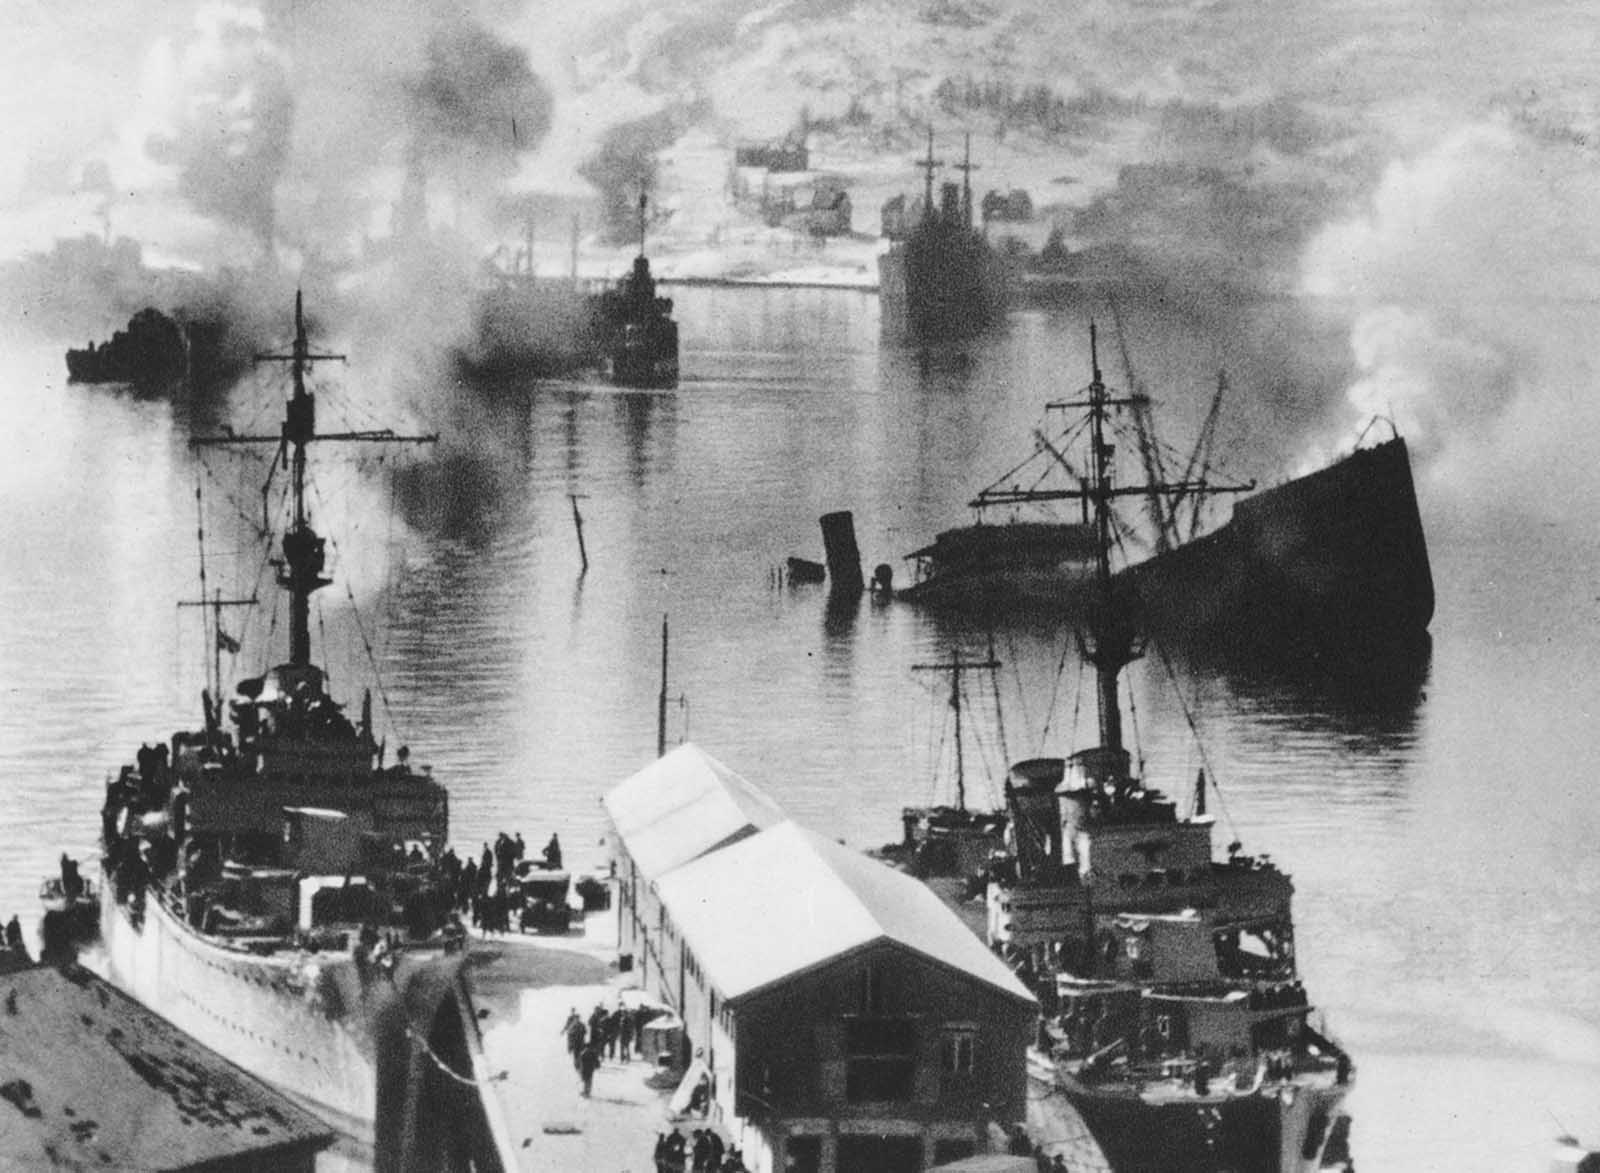 The remains of a naval battle in Narvik, Norway in 1940. Several battles between German and Norwegian forces took place in the Ofotfjord in the spring of 1940.